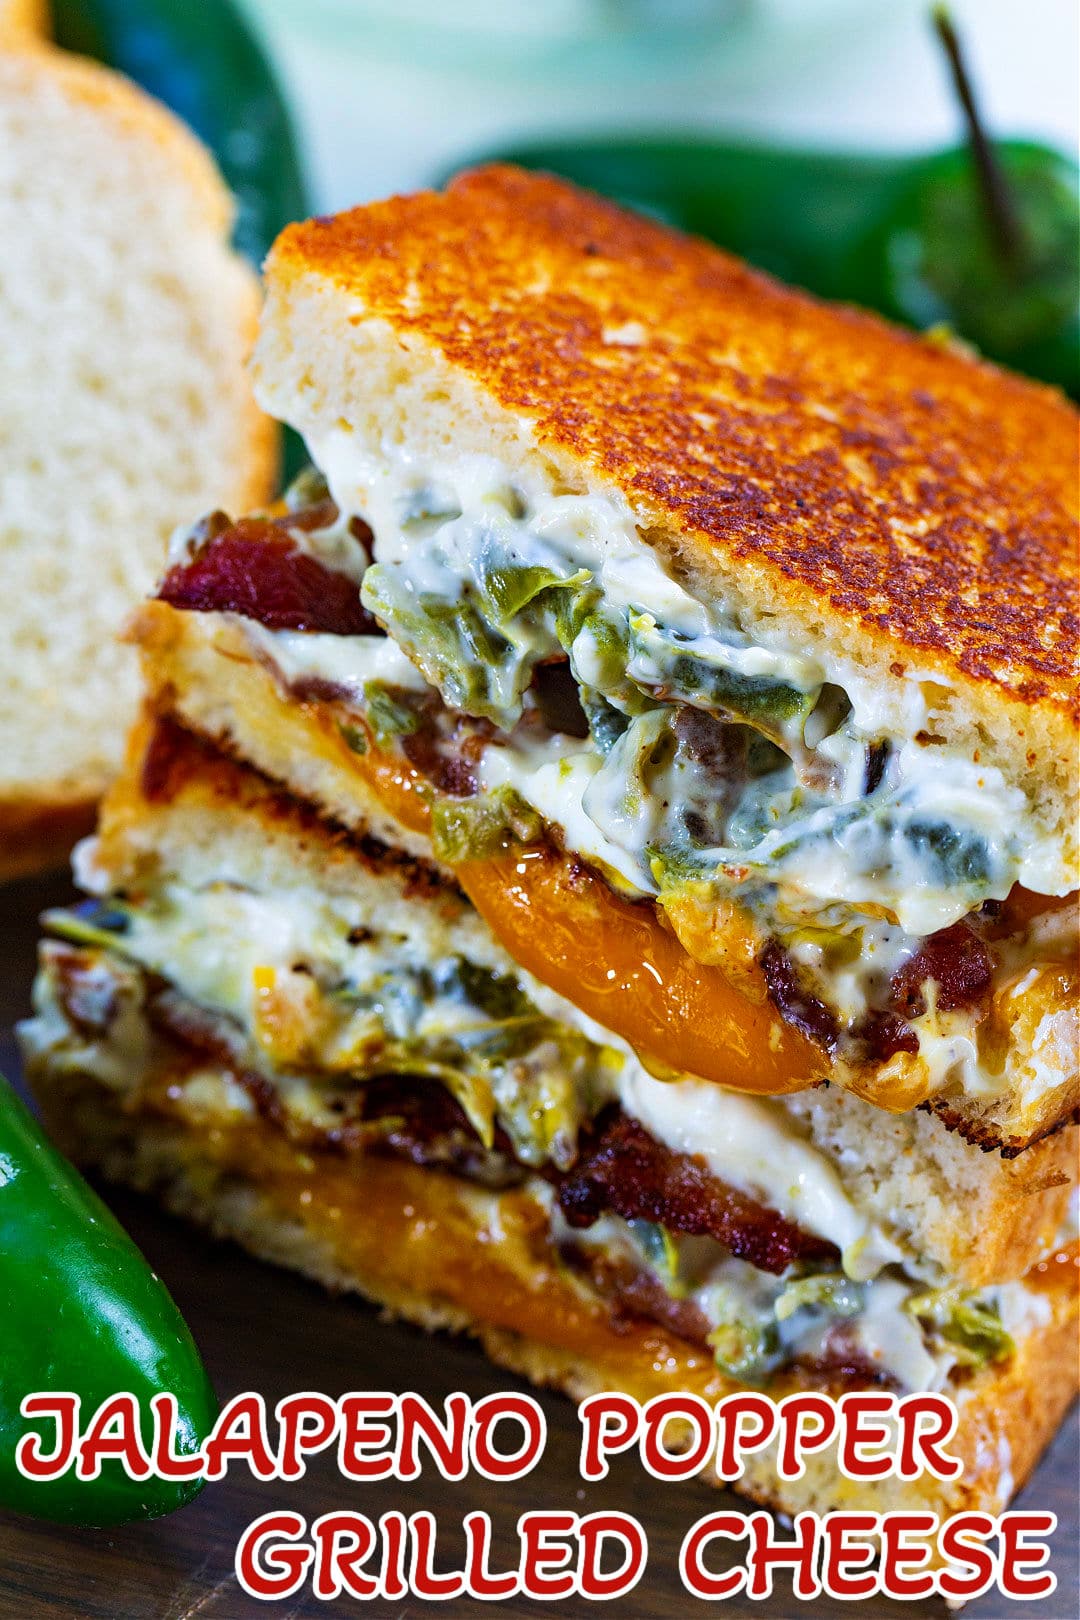 Jalapeno Popper Grilled Cheese slices stacked on top of each other.